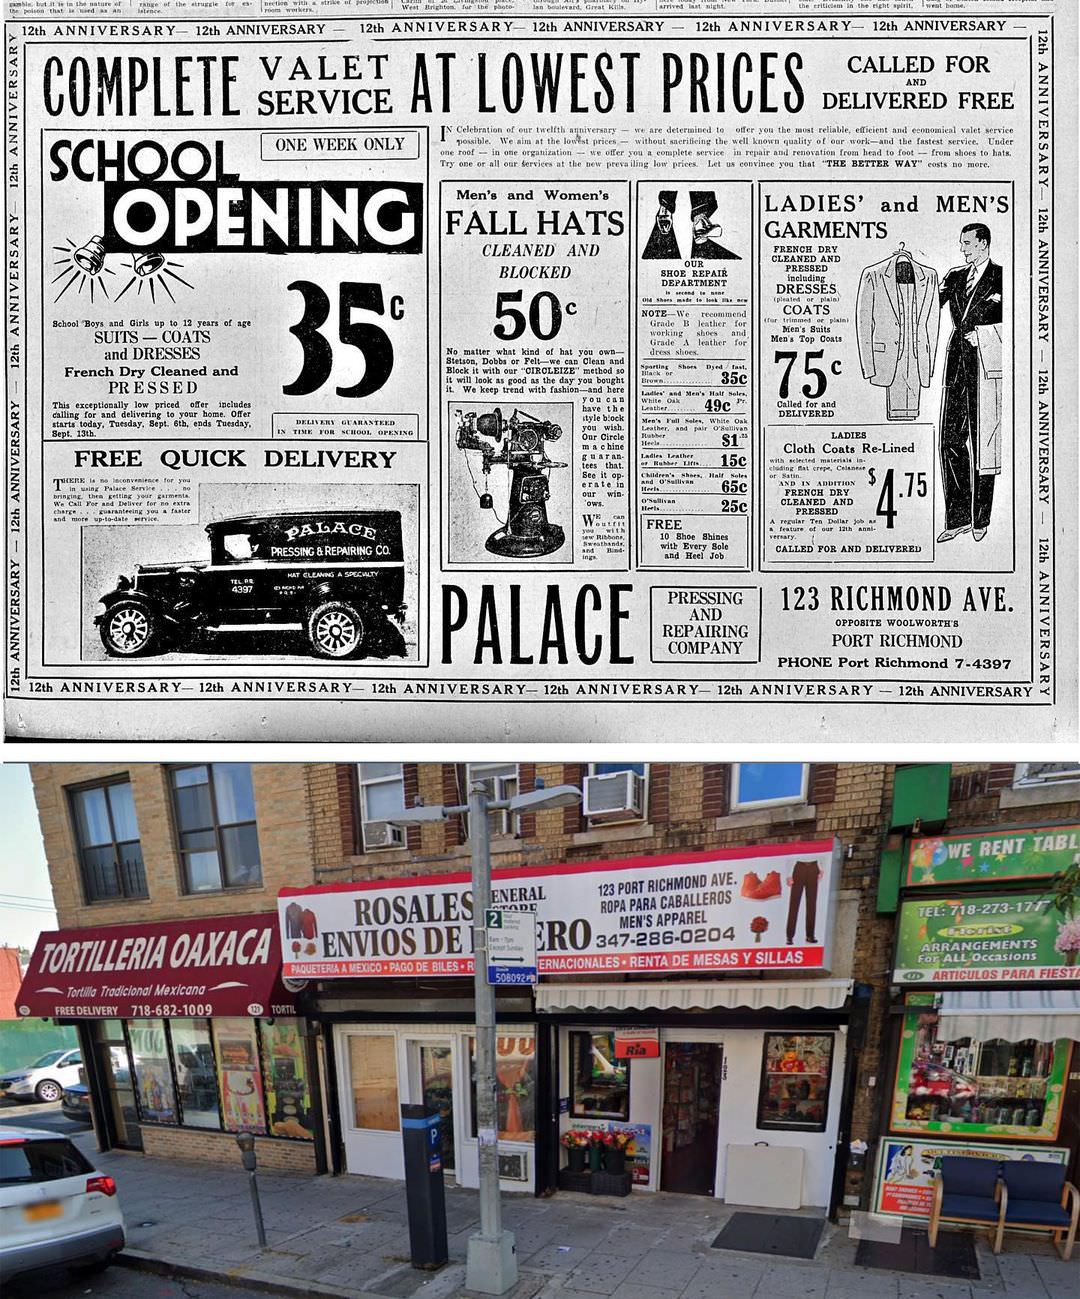 The Palace Offers Dry Cleaning For 75¢, Celebrating 12Th Anniversary, 1932.